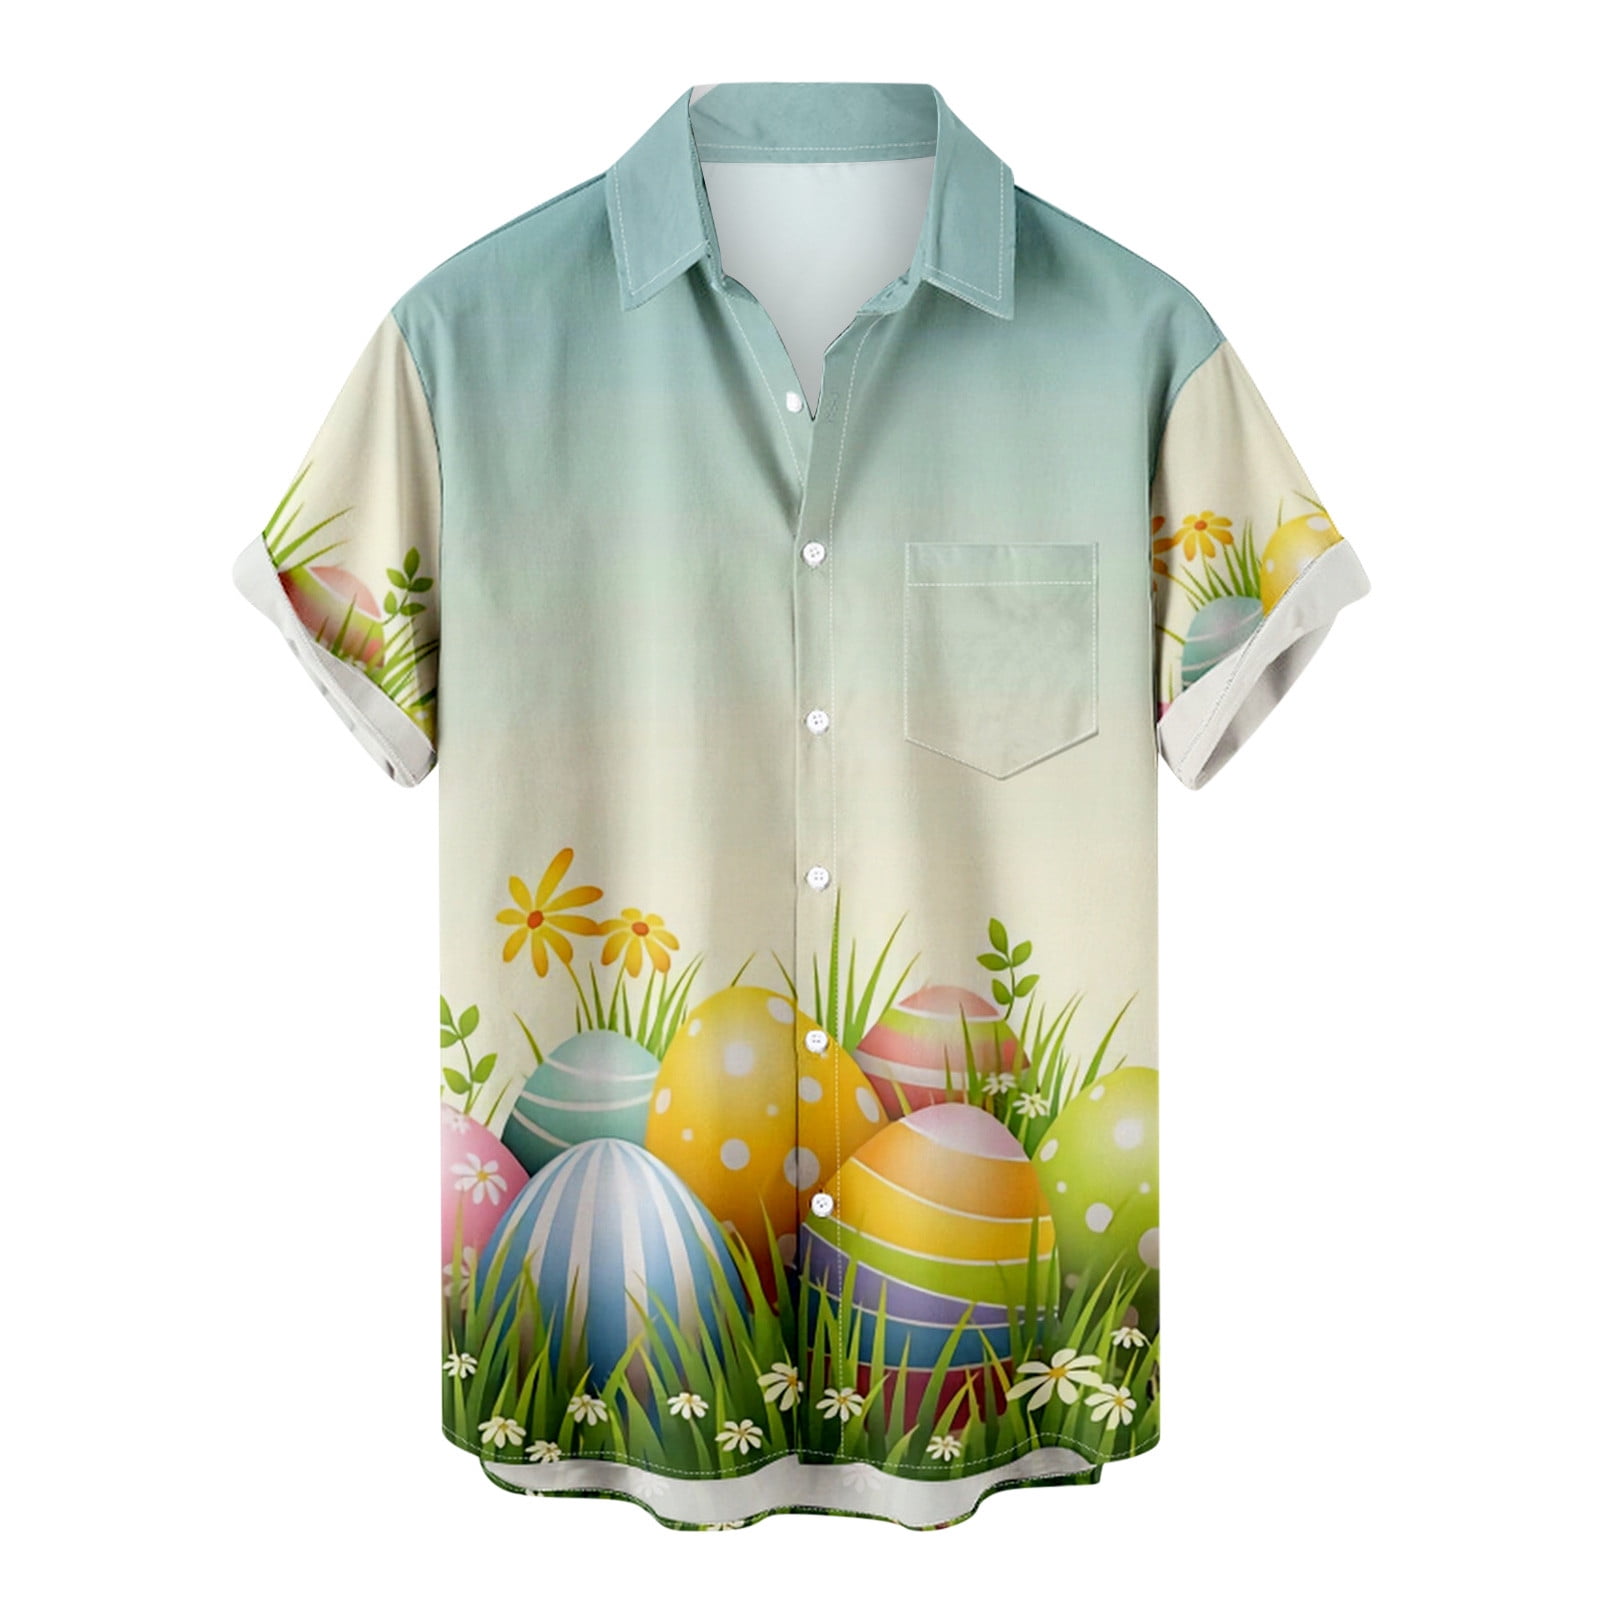 Zcfzjw Easter Shirts for Men Casual Button Down Short Sleeve Cute Easter Eggs Print Collared T-shirts Big and Tall Regular Fitted Comfy Hawaiian